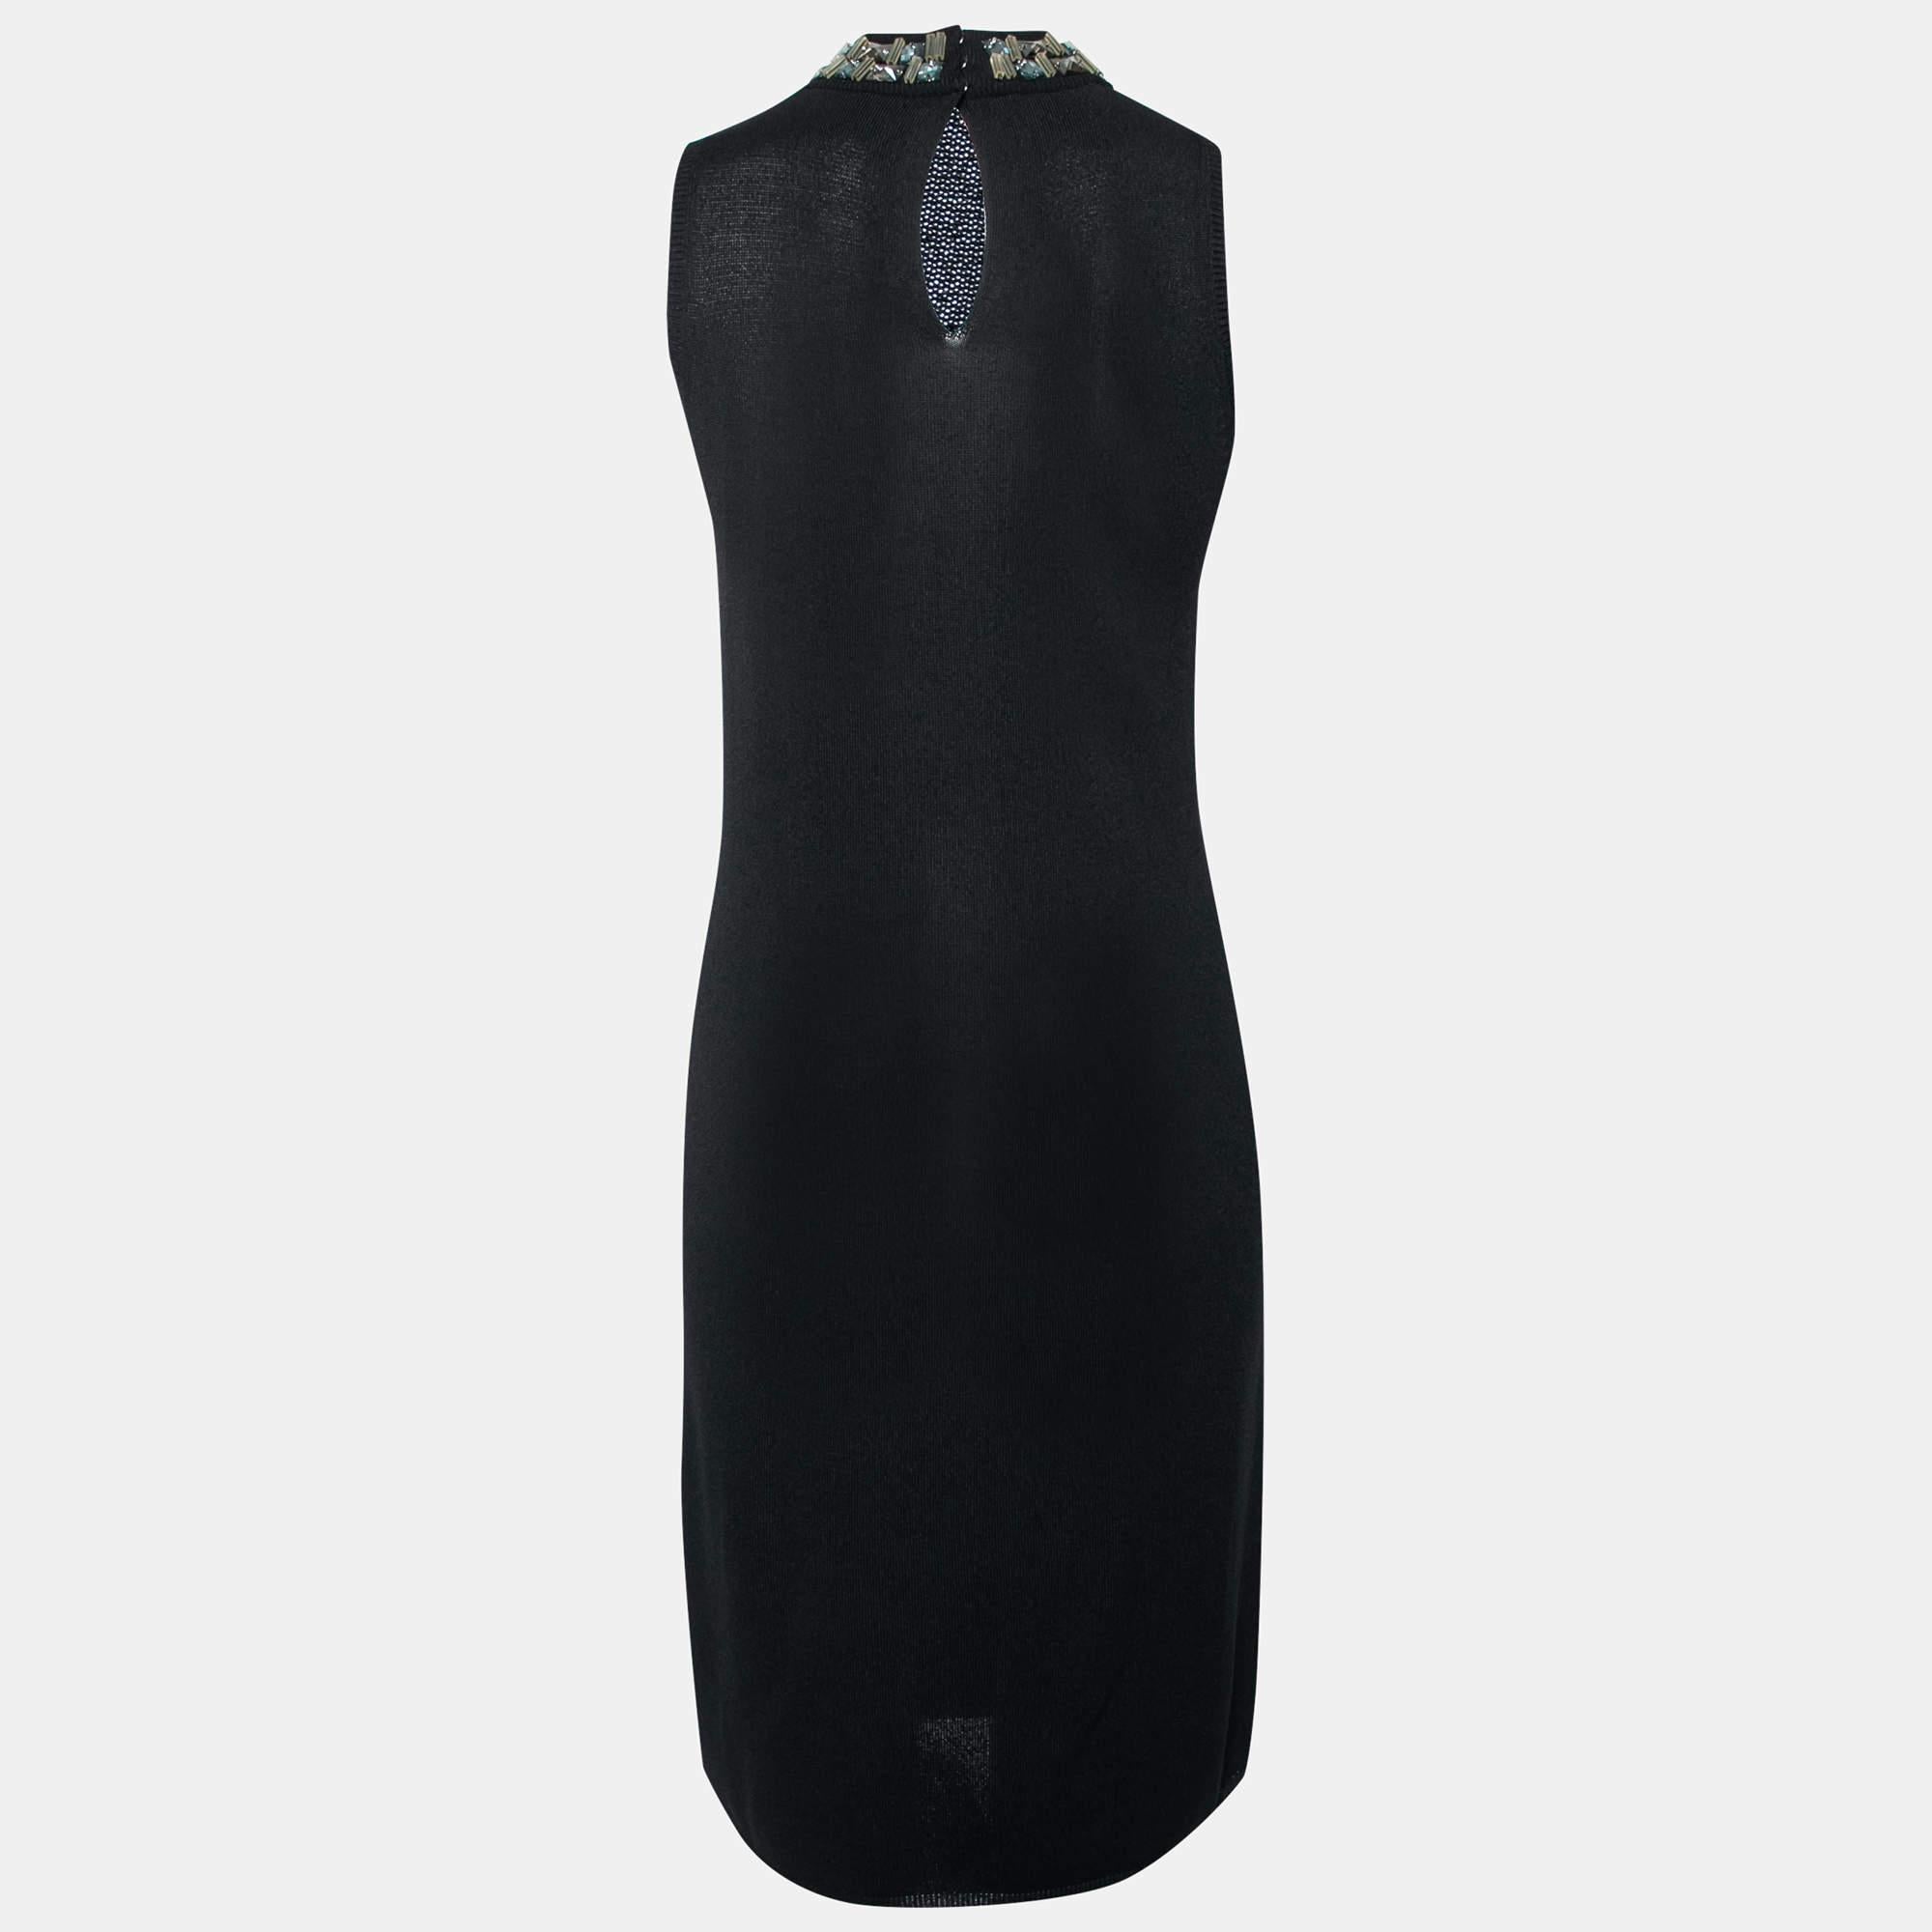 This simple and elegant black dress from Prada is perfect for those special occasions. It is stitched from knit fabric and features an embellished neck detail. Wear the sleeveless dress with high heels and a statement clutch.

